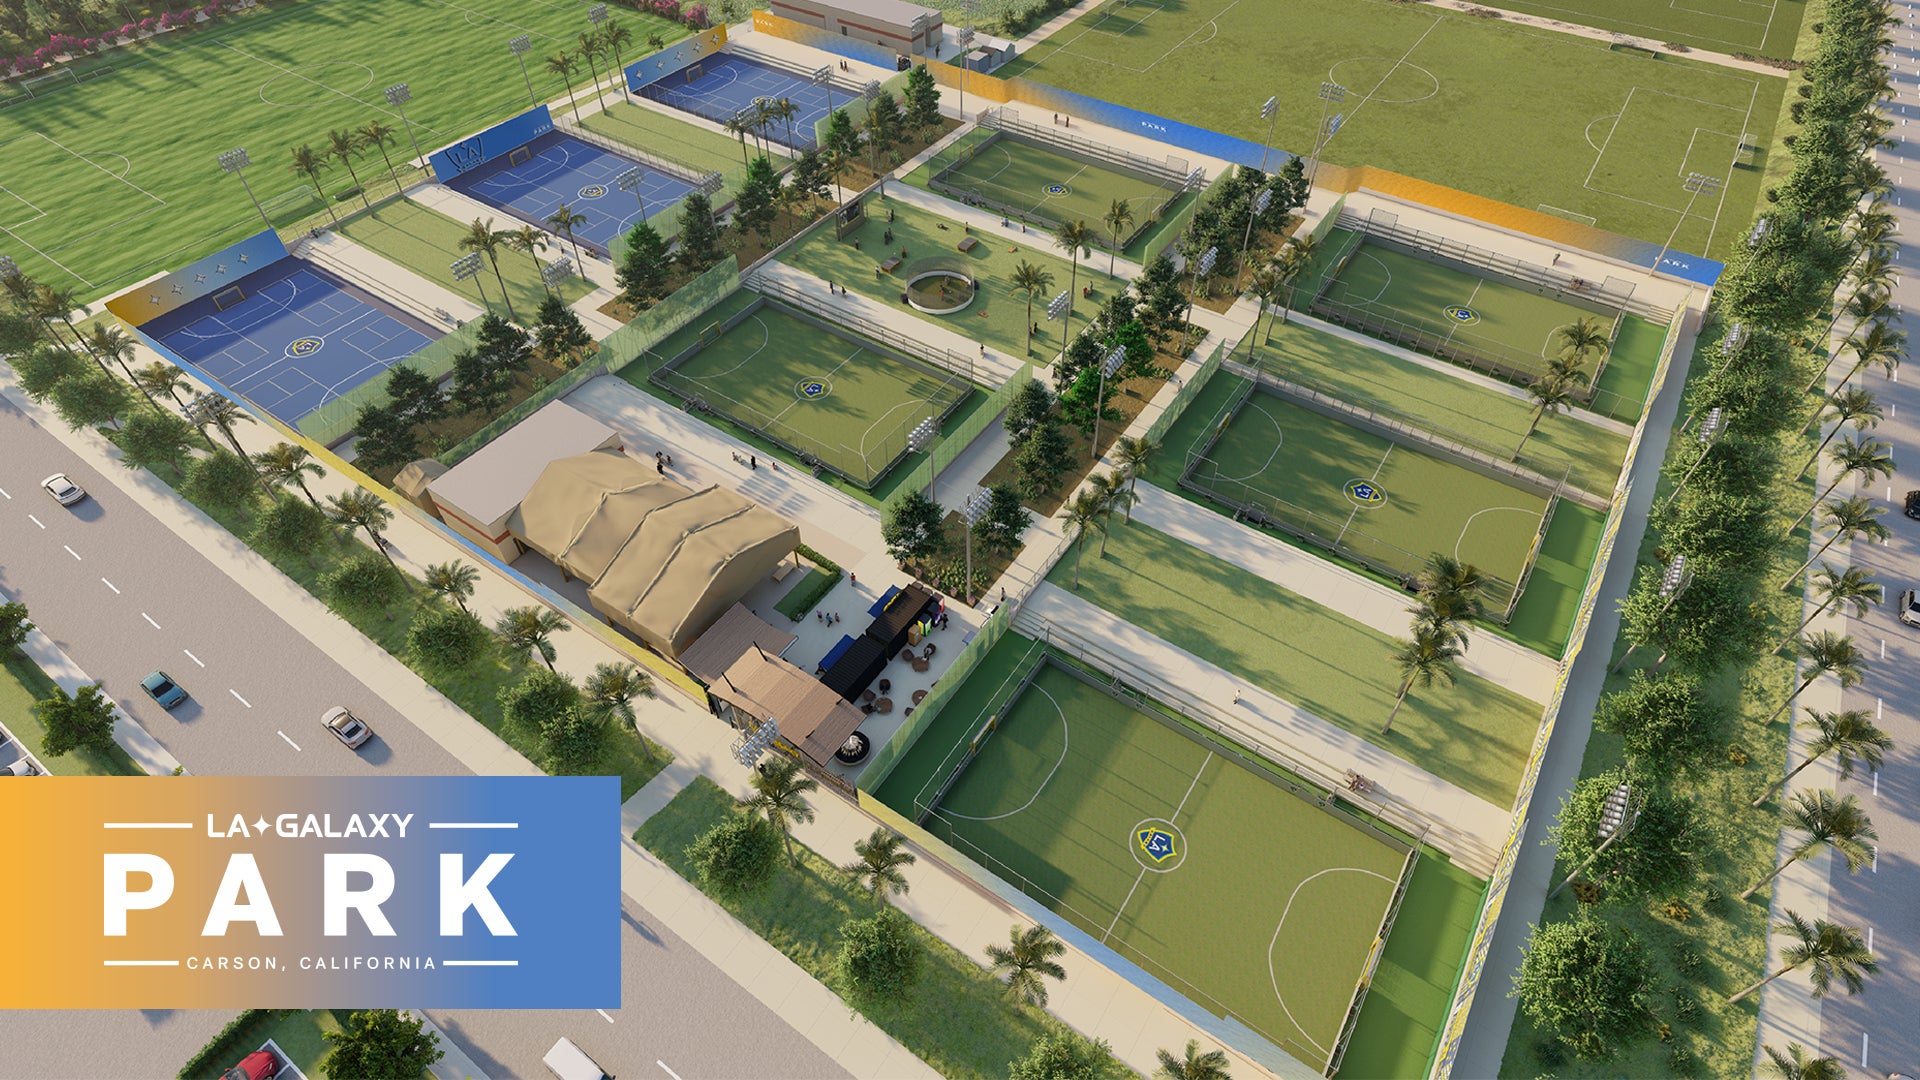 More Info for Dignity Health Sports Park and LA Galaxy to Launch Galaxy Park in March 2023 including Futsal Courts, 5v5 Soccer Fields, Pickleball Courts and Padel Courts  